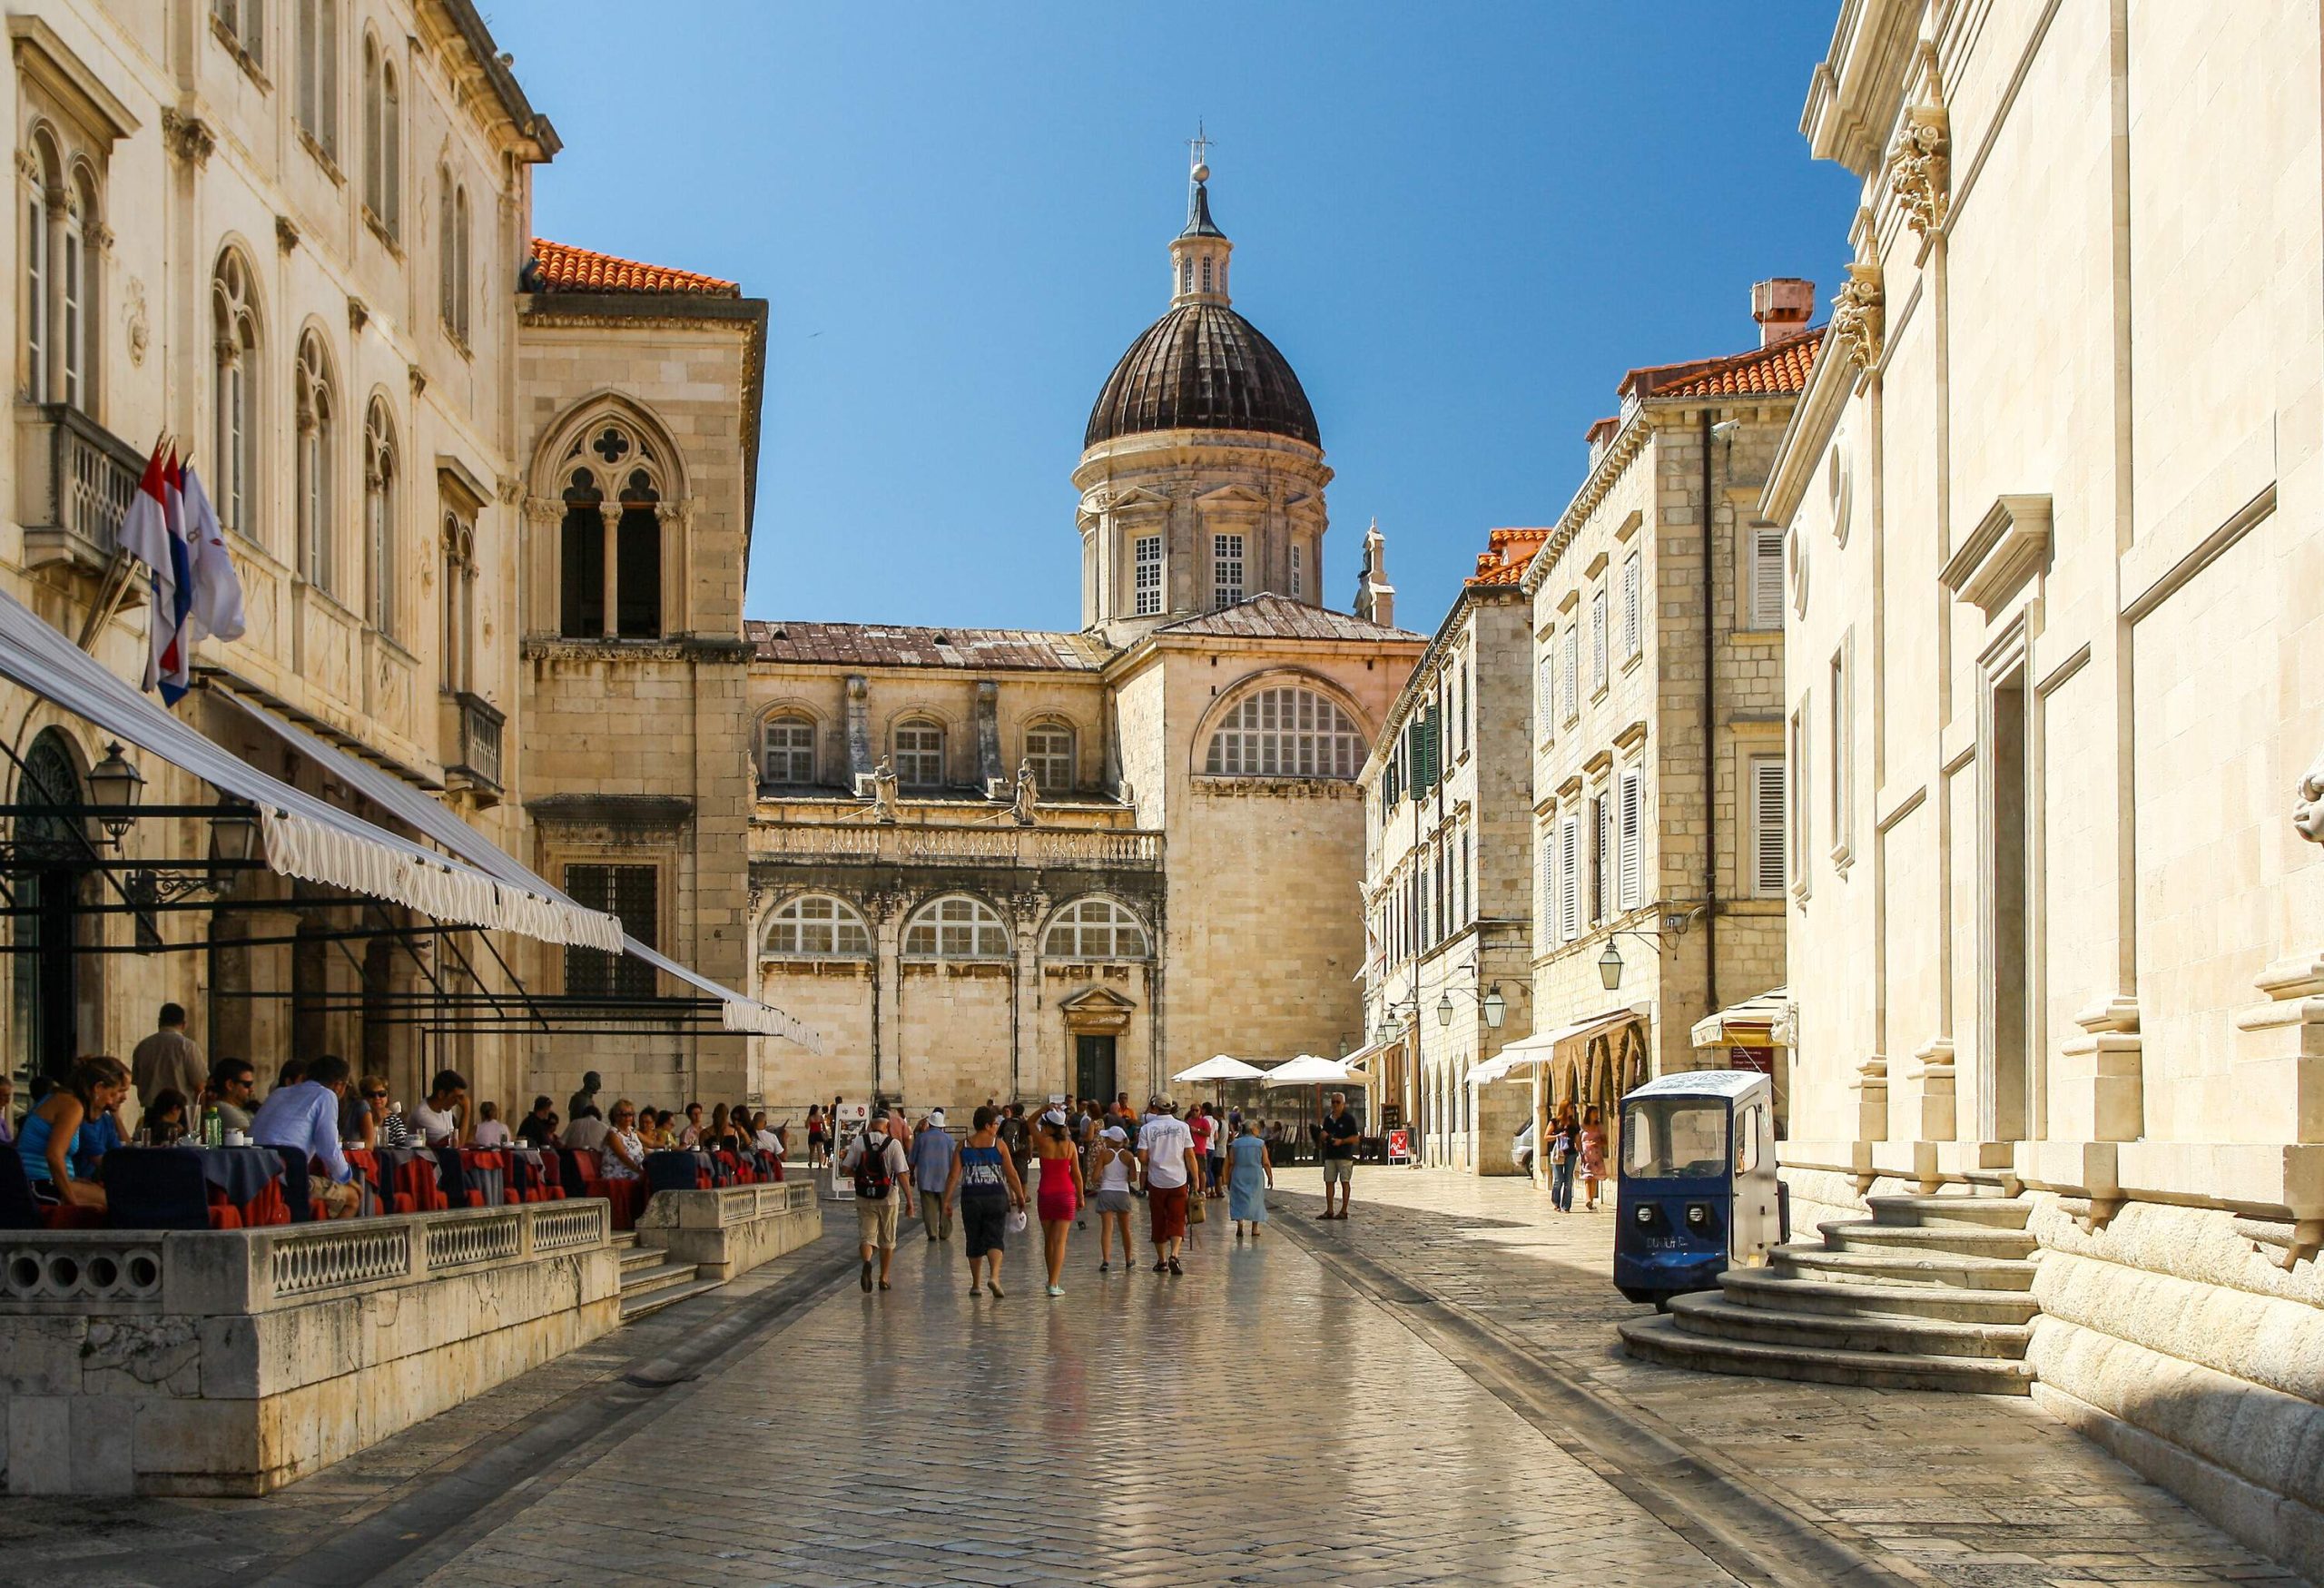 A cobbled street lined with classic buildings, outdoor restaurants and a Baroque architecture cathedral in the centre.